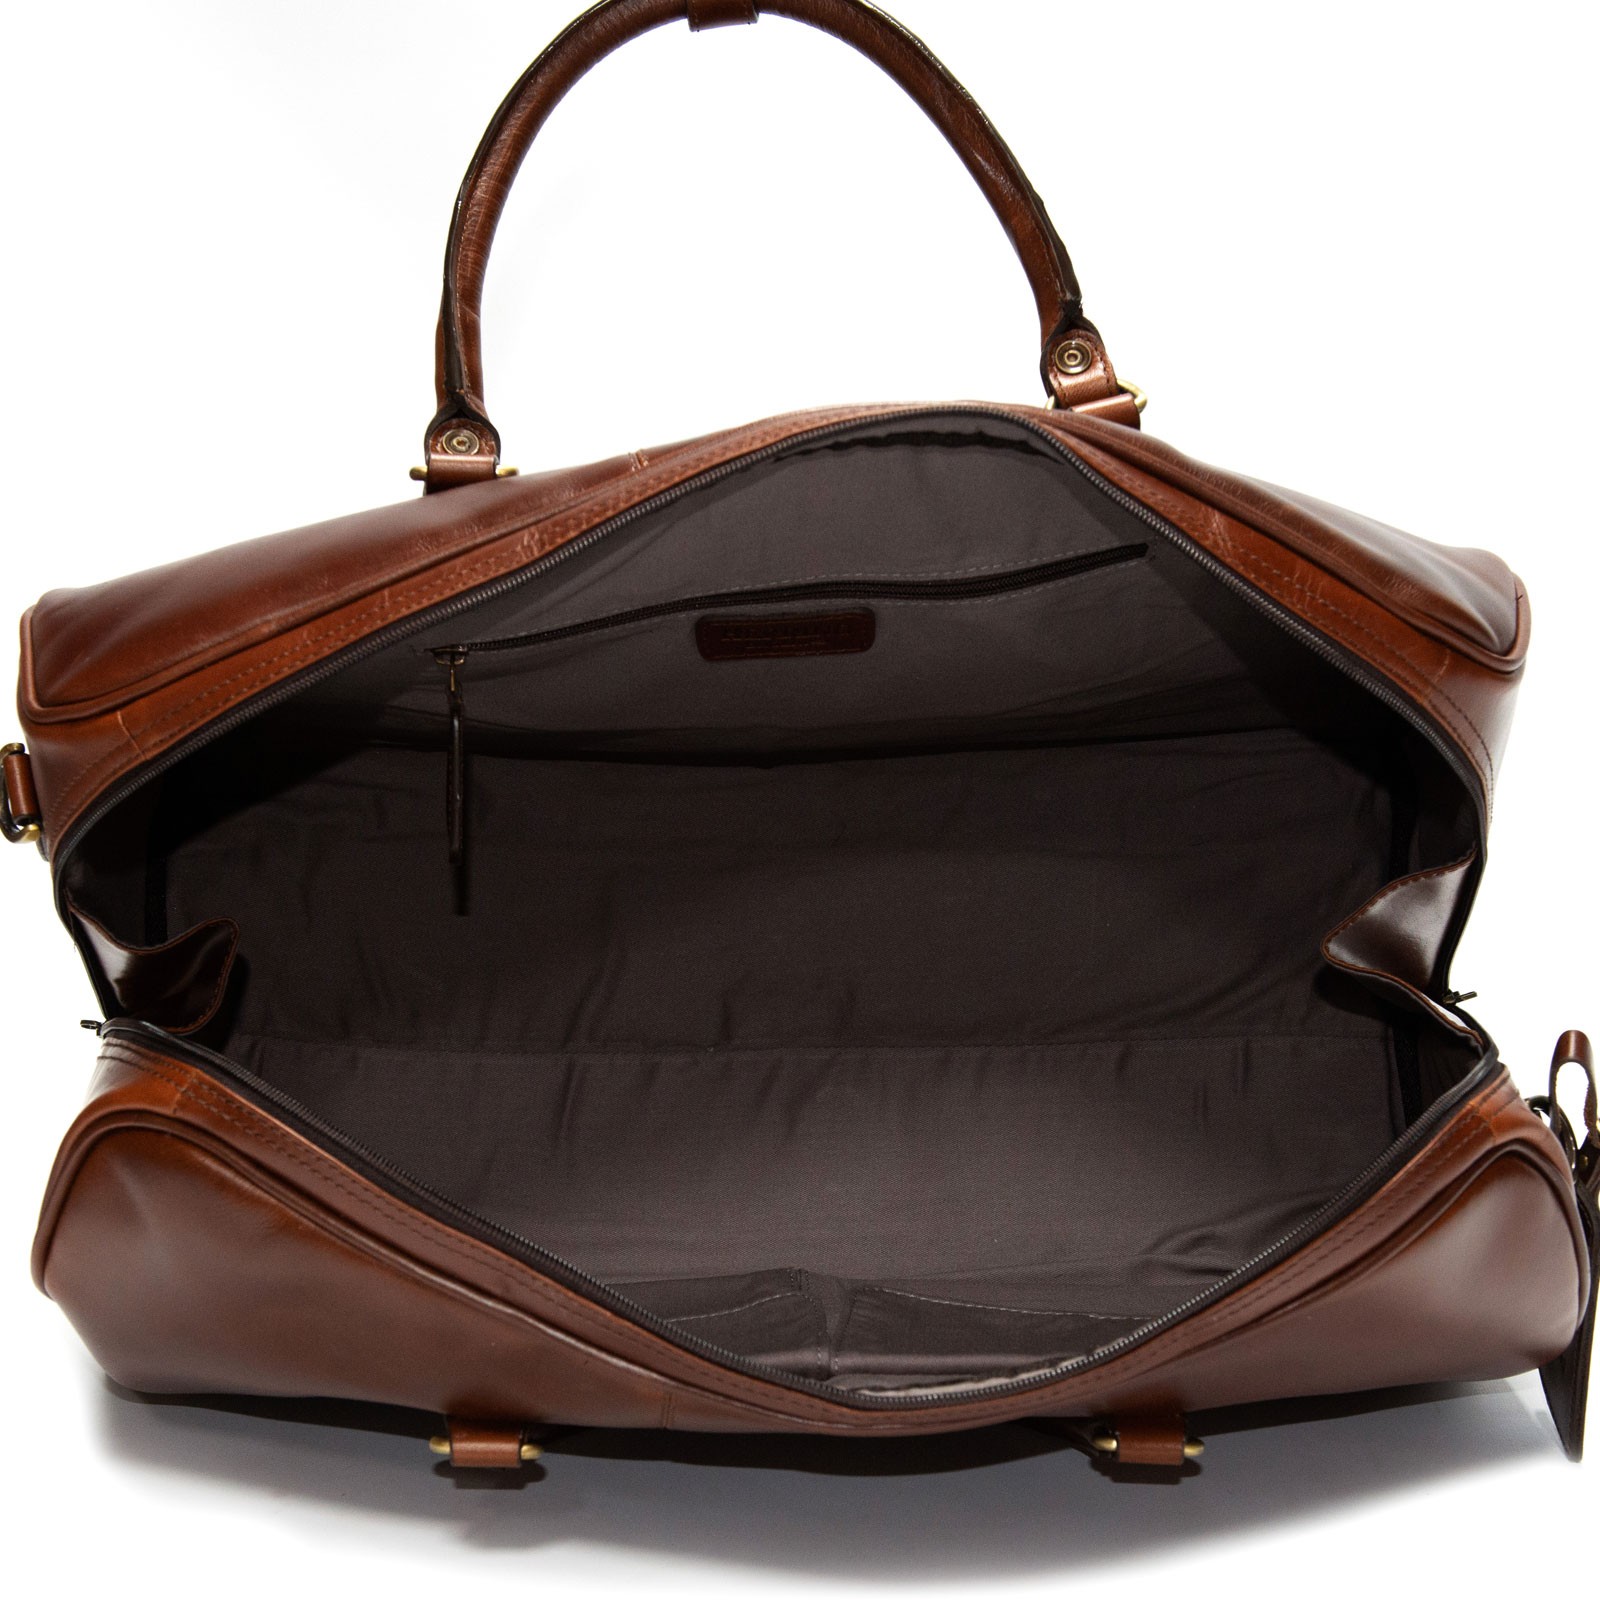 Herring shoes | Herring Luggage | Bovey Holdall in Brandy Calf at ...